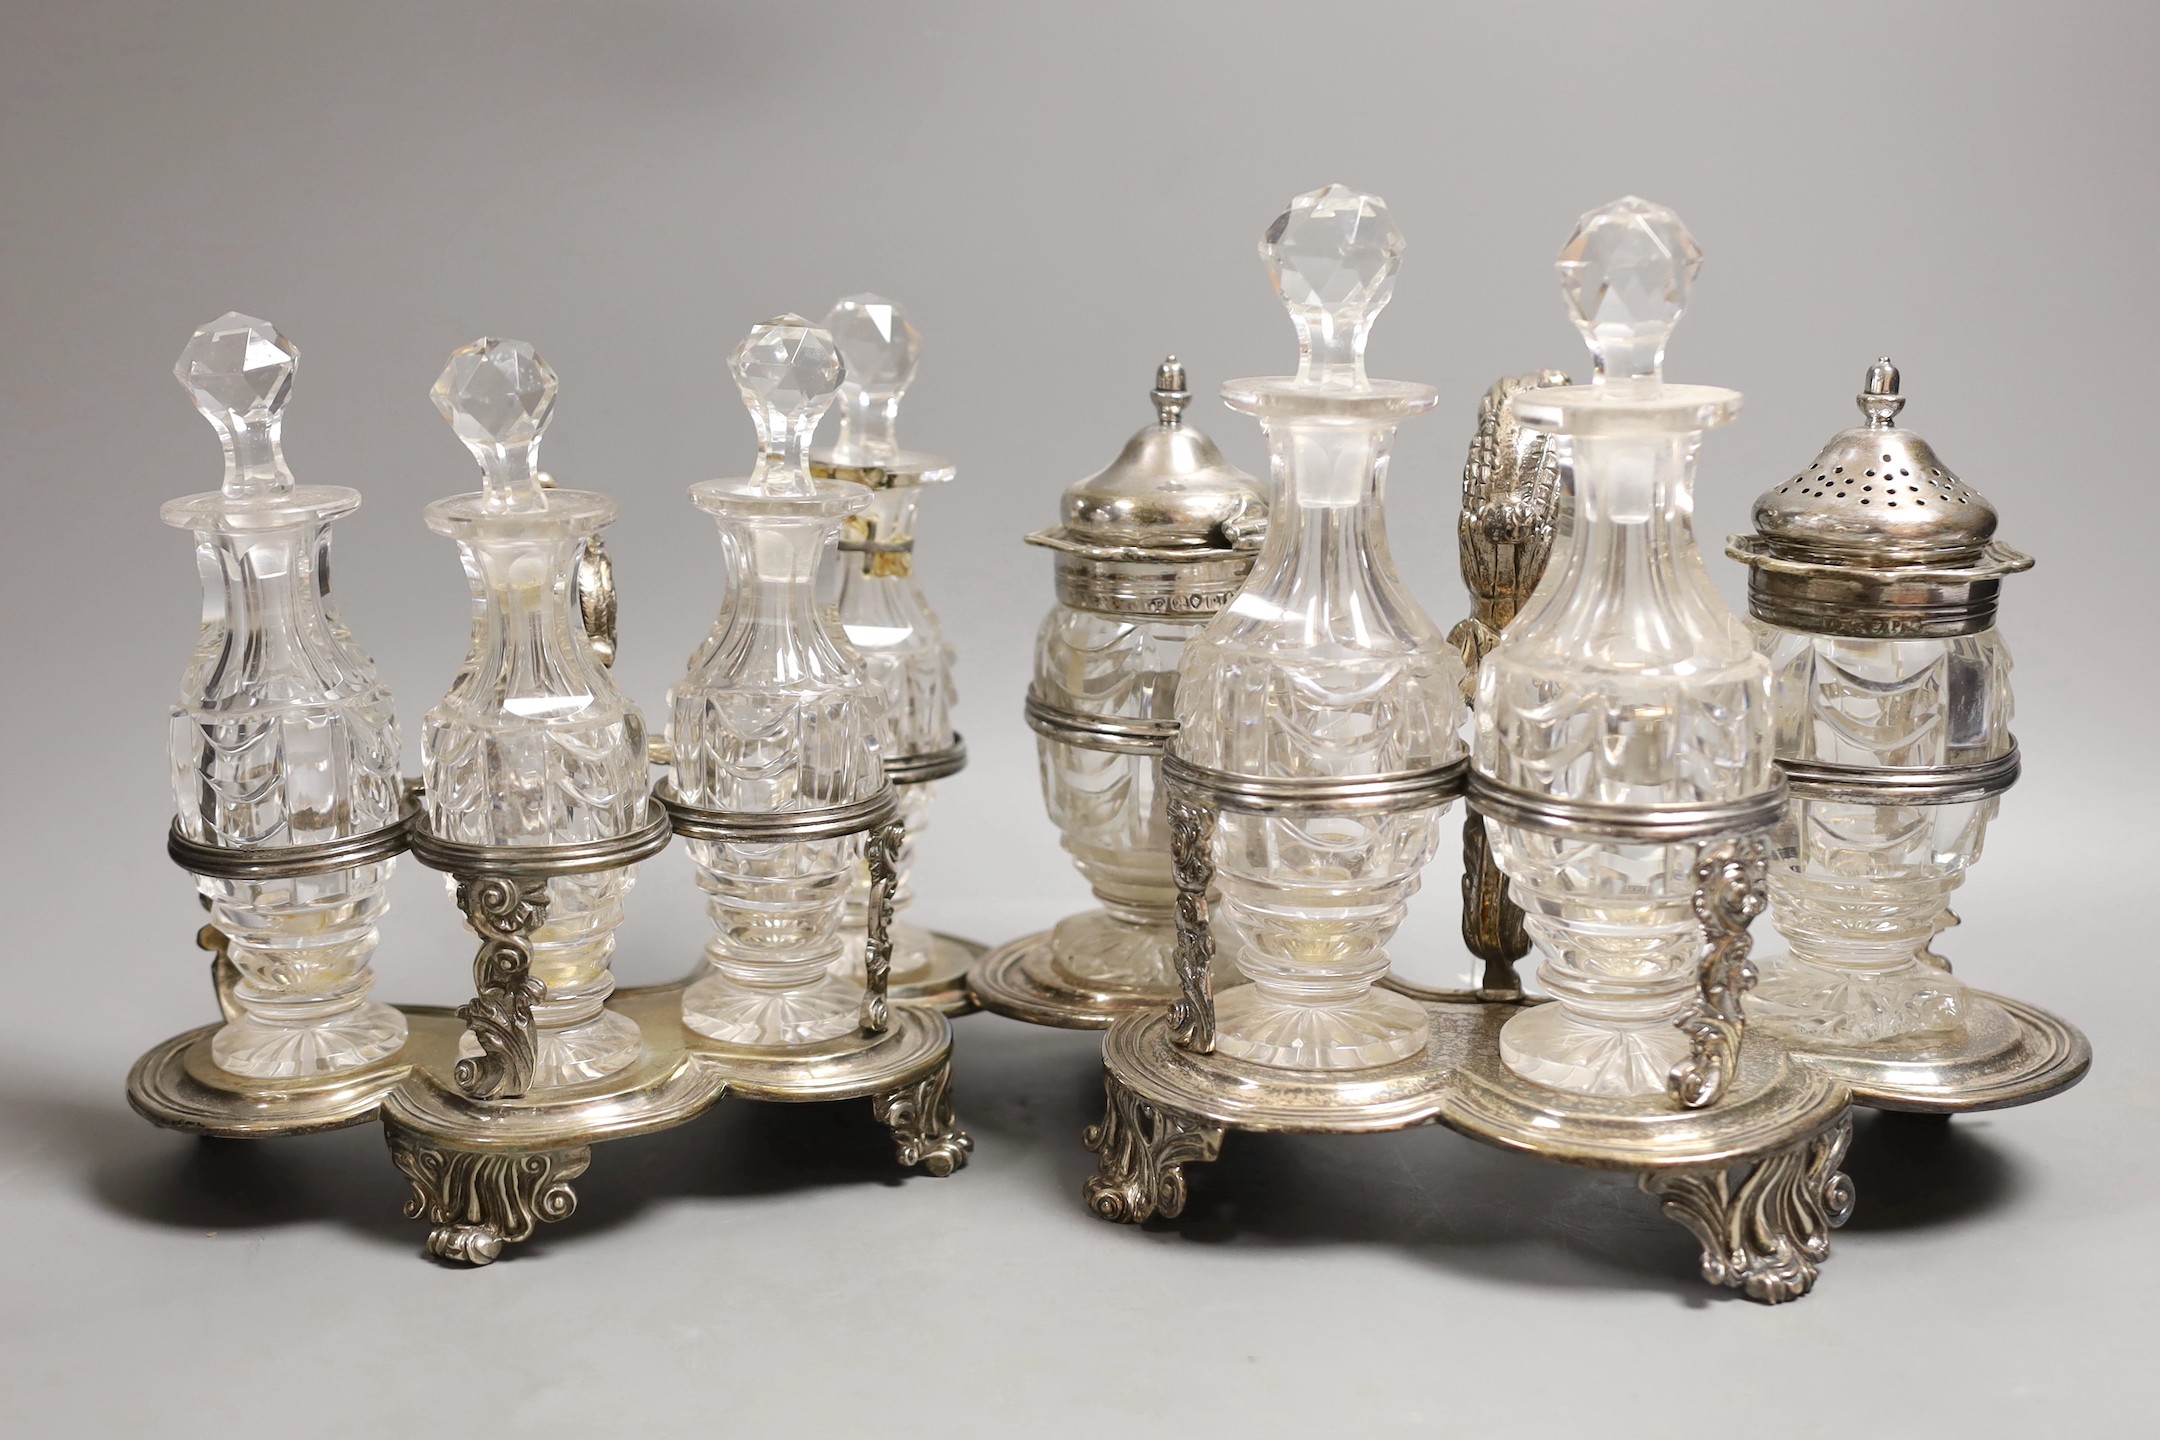 A graduated pair of William IV silver cruet stands, with ornate scroll handles, by John Fry II, London, 1830, both with four glass bottles, the largest with two silver mounted bottles, glass a.f., tallest 16cm, 34.3oz.